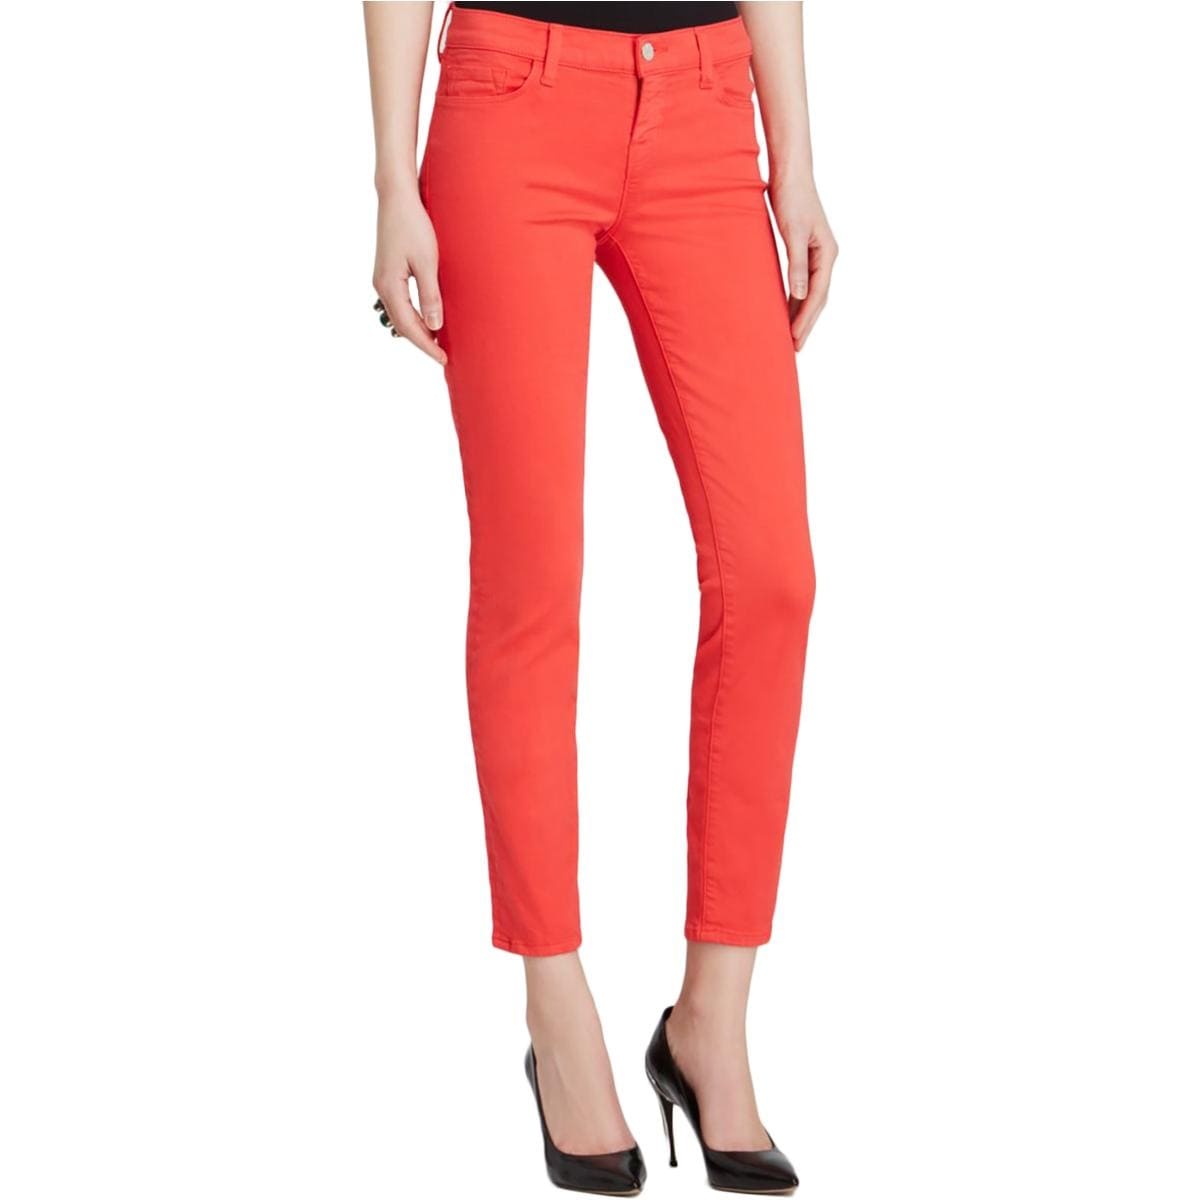 low rise colored skinny jeans